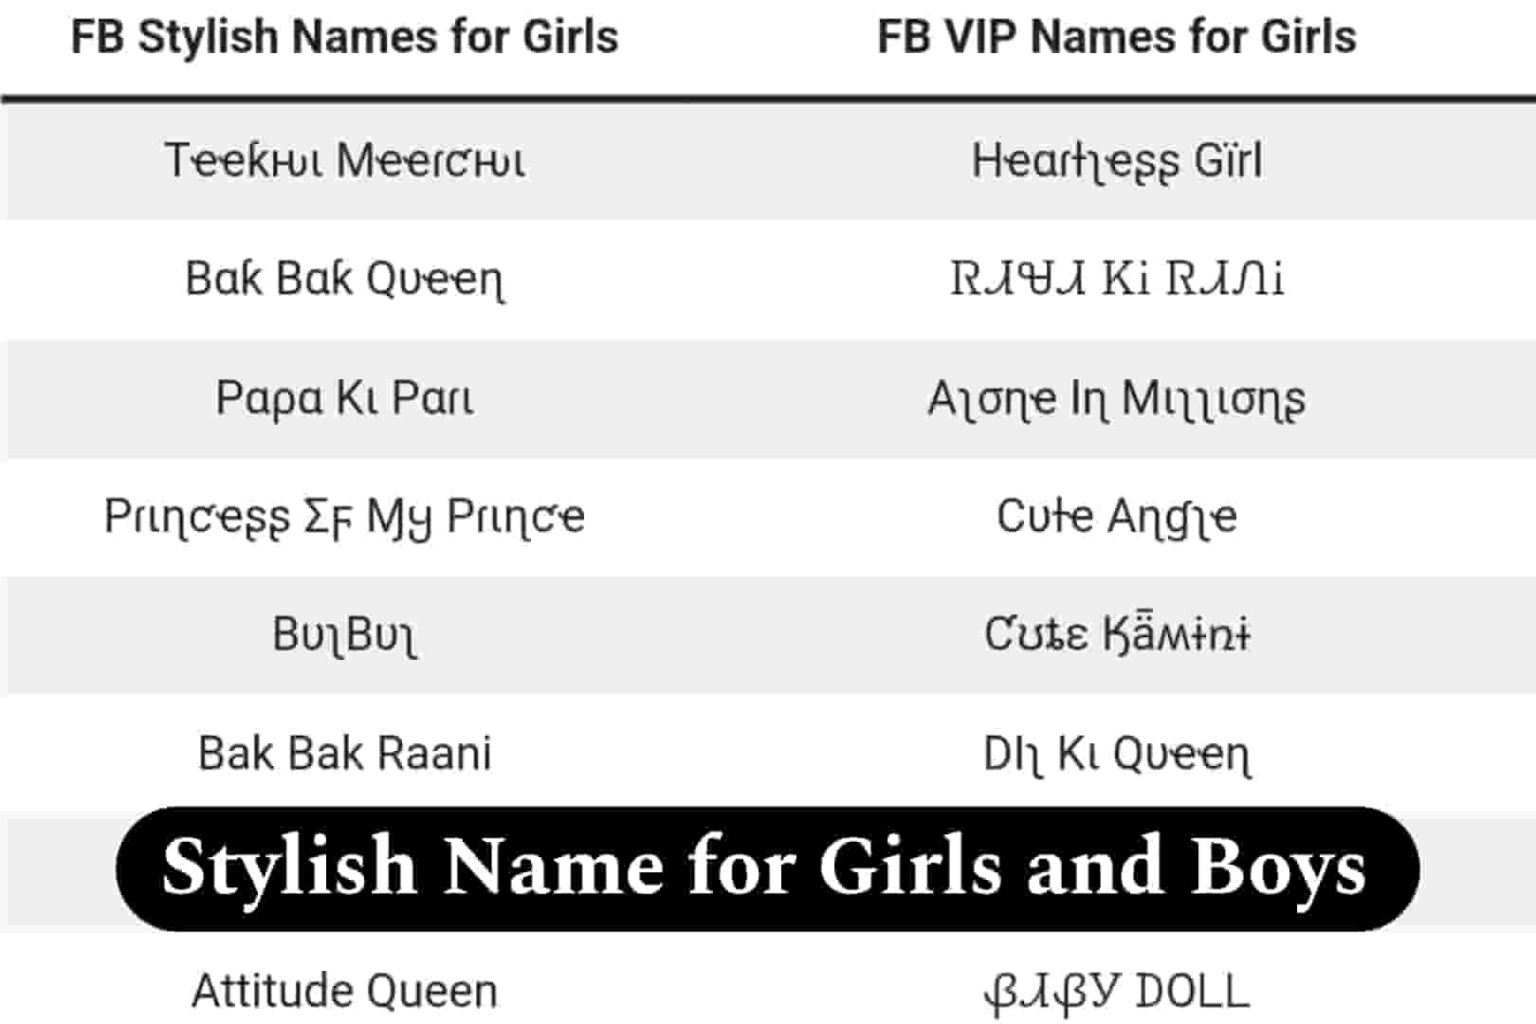 Stylish Names For FB Girl and Boy